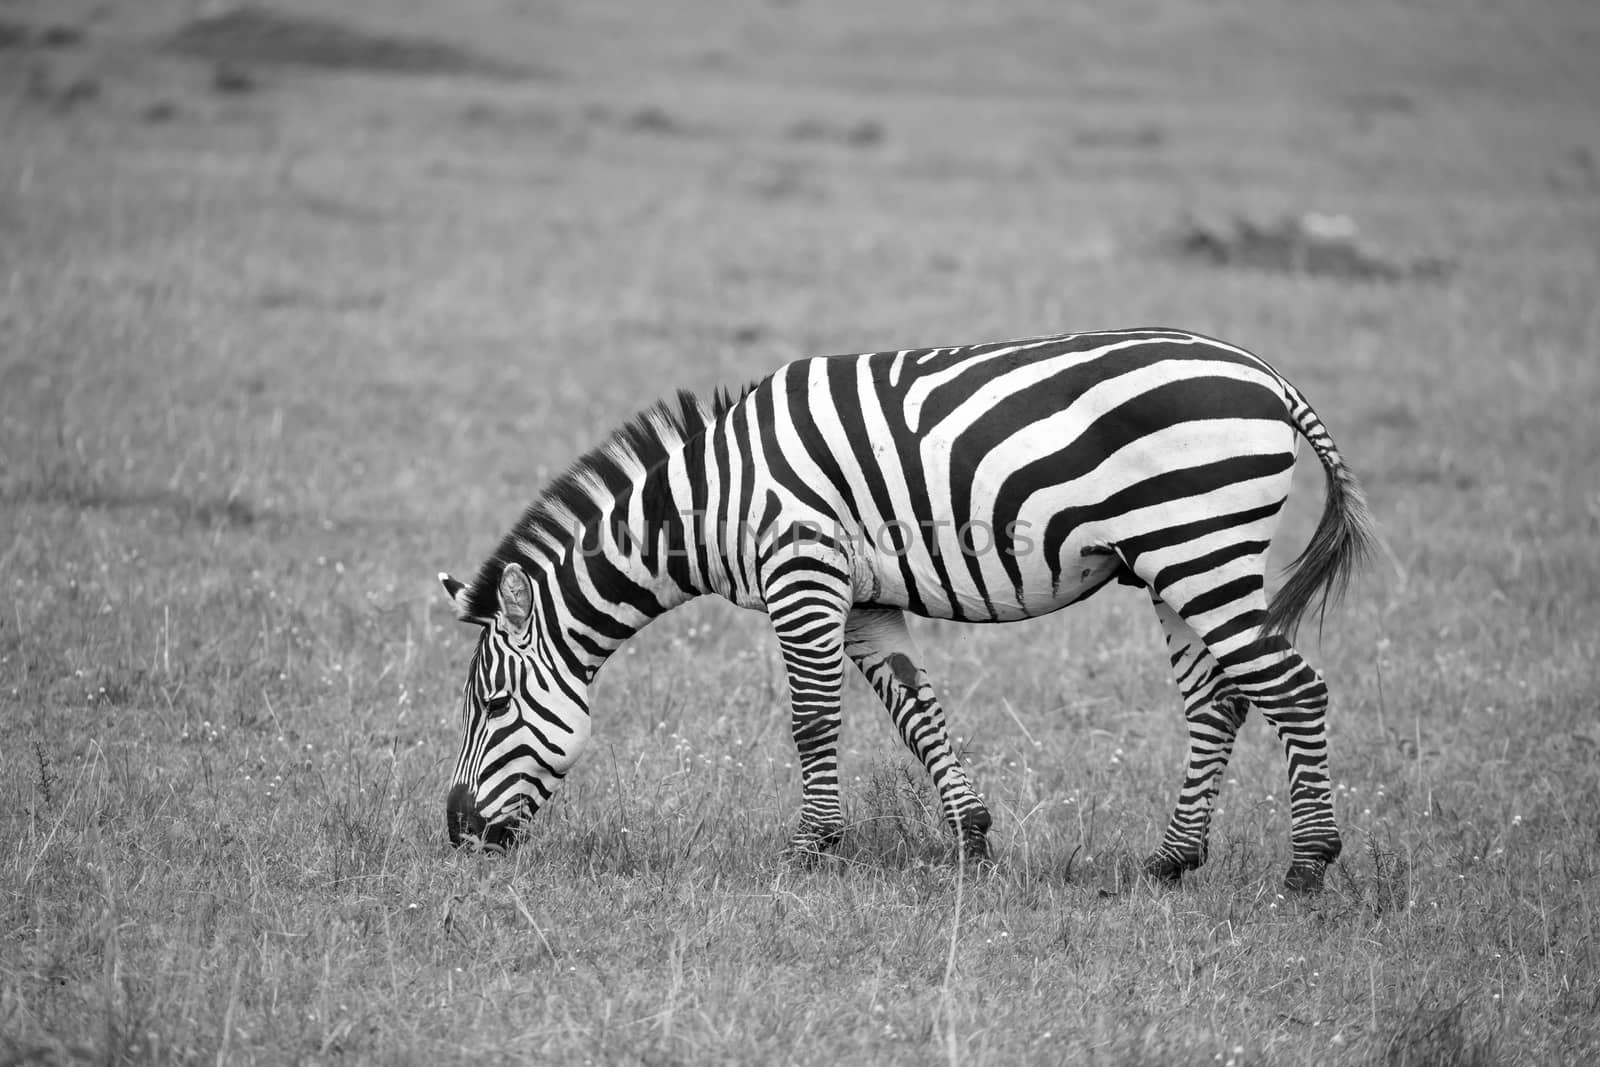 Zebras run and graze in the savannah by 25ehaag6